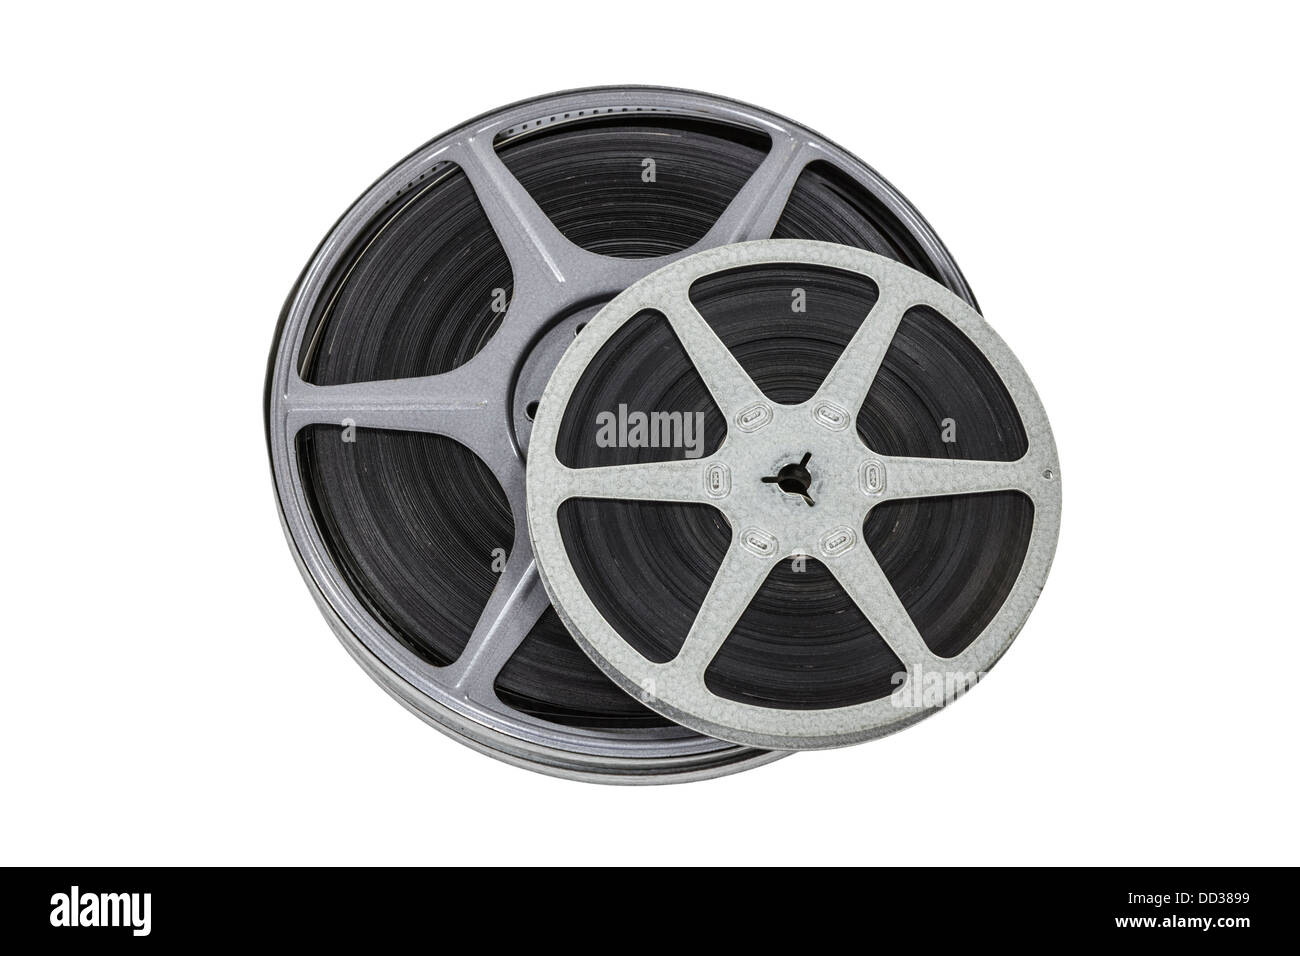 Vintage 8mm film reels isolated with clipping path Stock Photo - Alamy